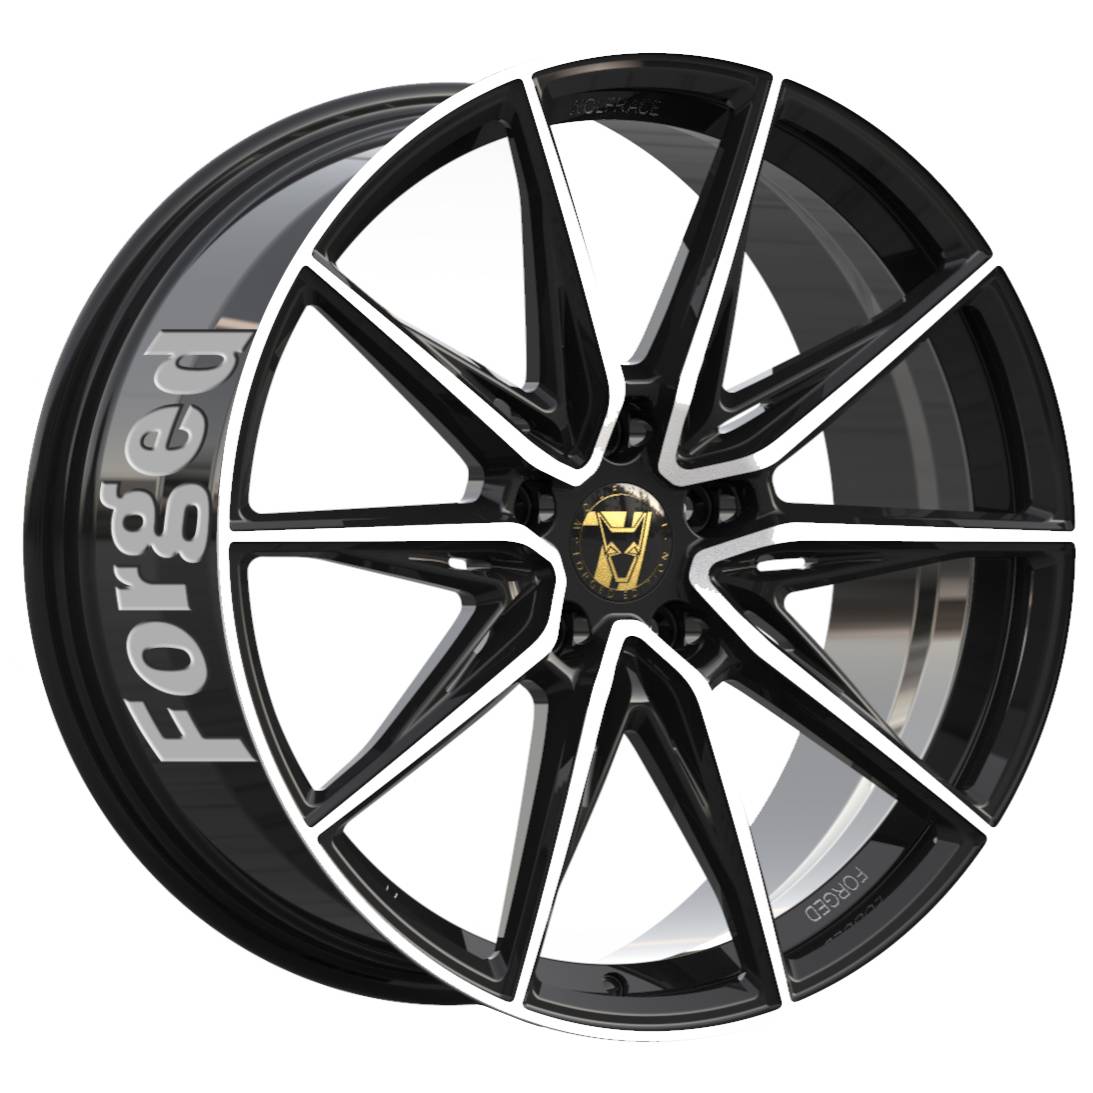 Demon Wheels 71 Forged Edition Urban Racer Forged [11x24] -5x120- ET 20